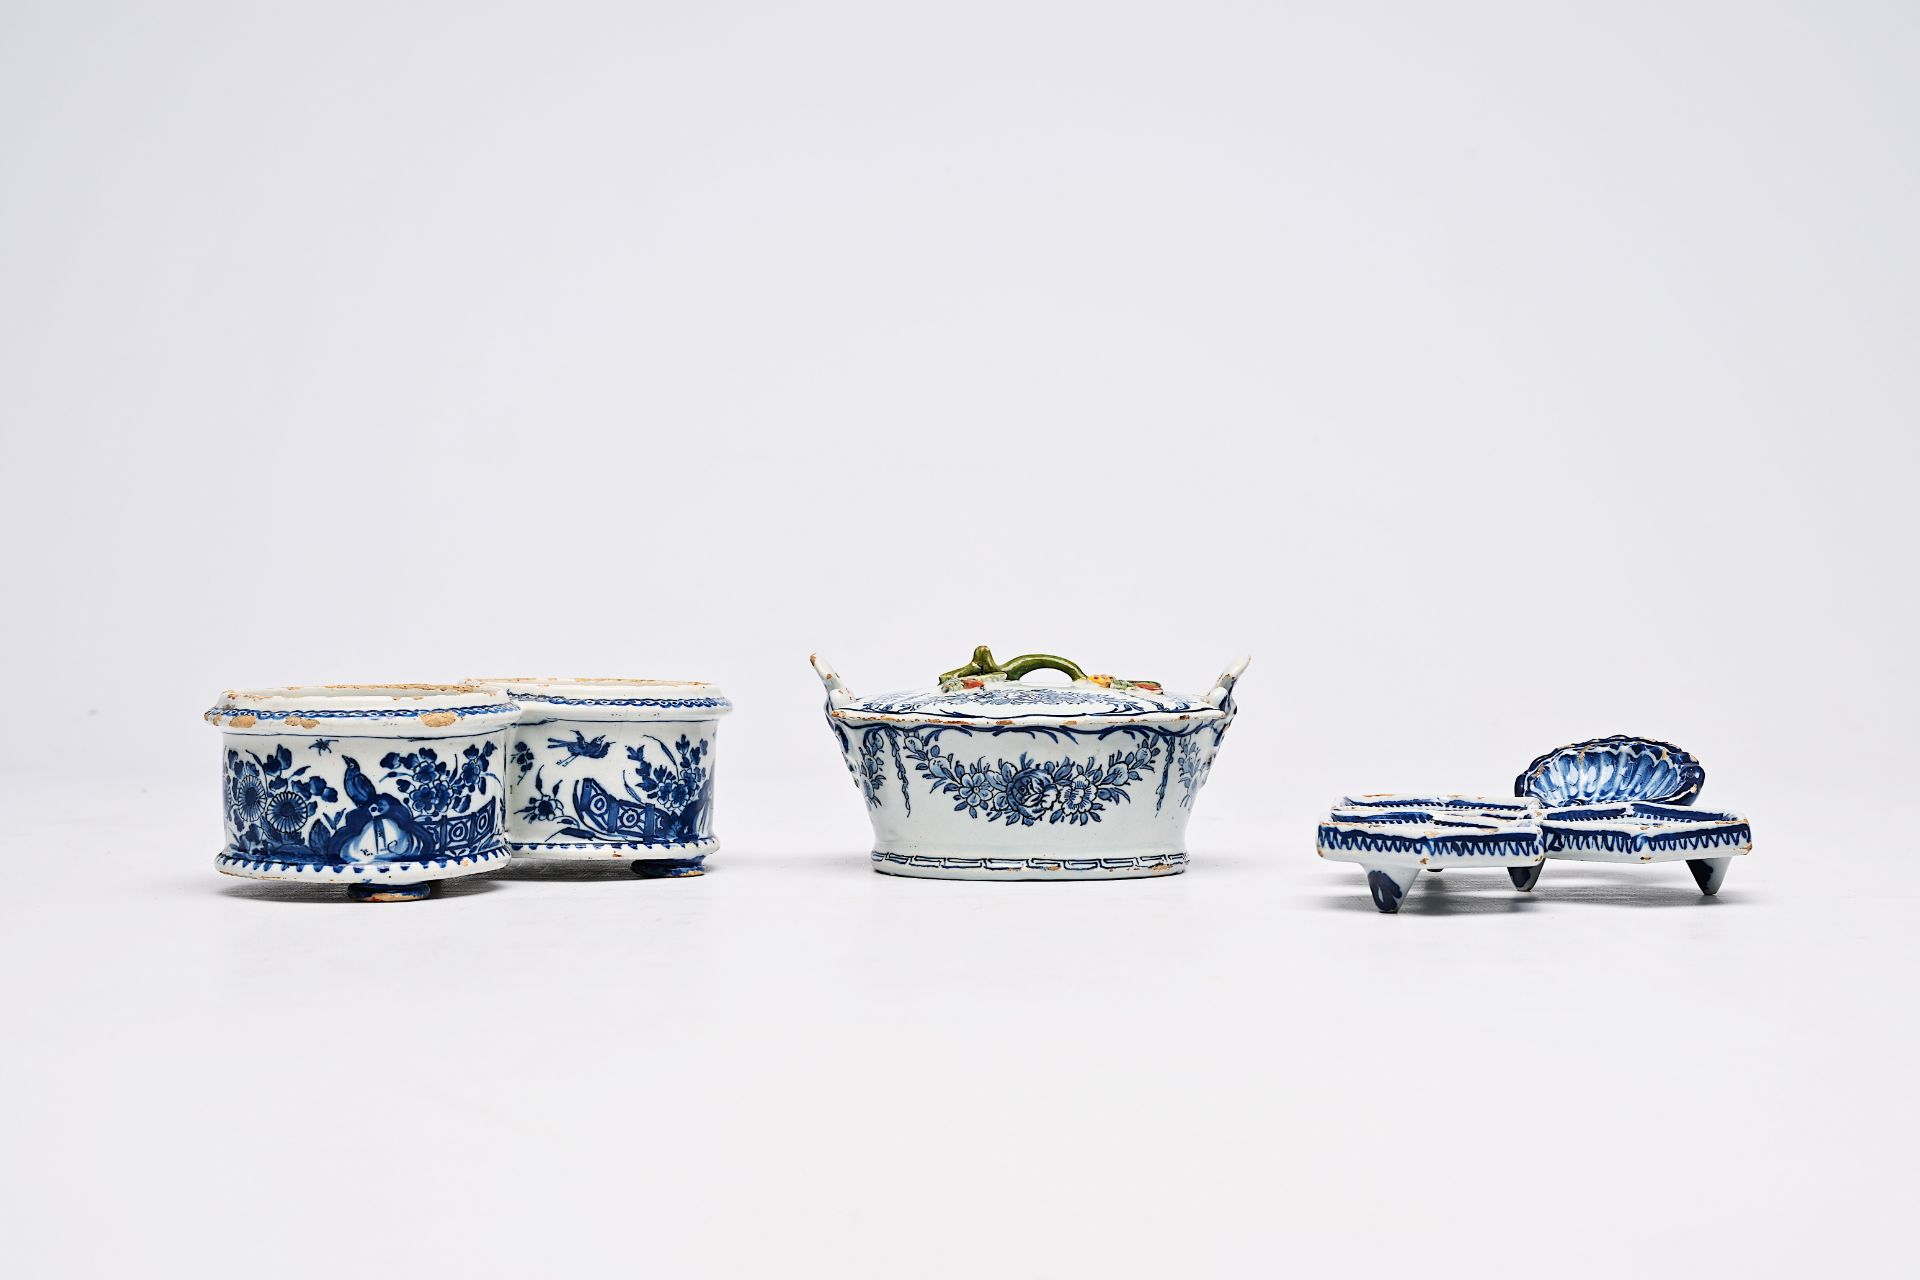 A Dutch Delft blue and white butter tub, an oil and vinegar holder and a spice dish with floral desi - Bild 3 aus 9